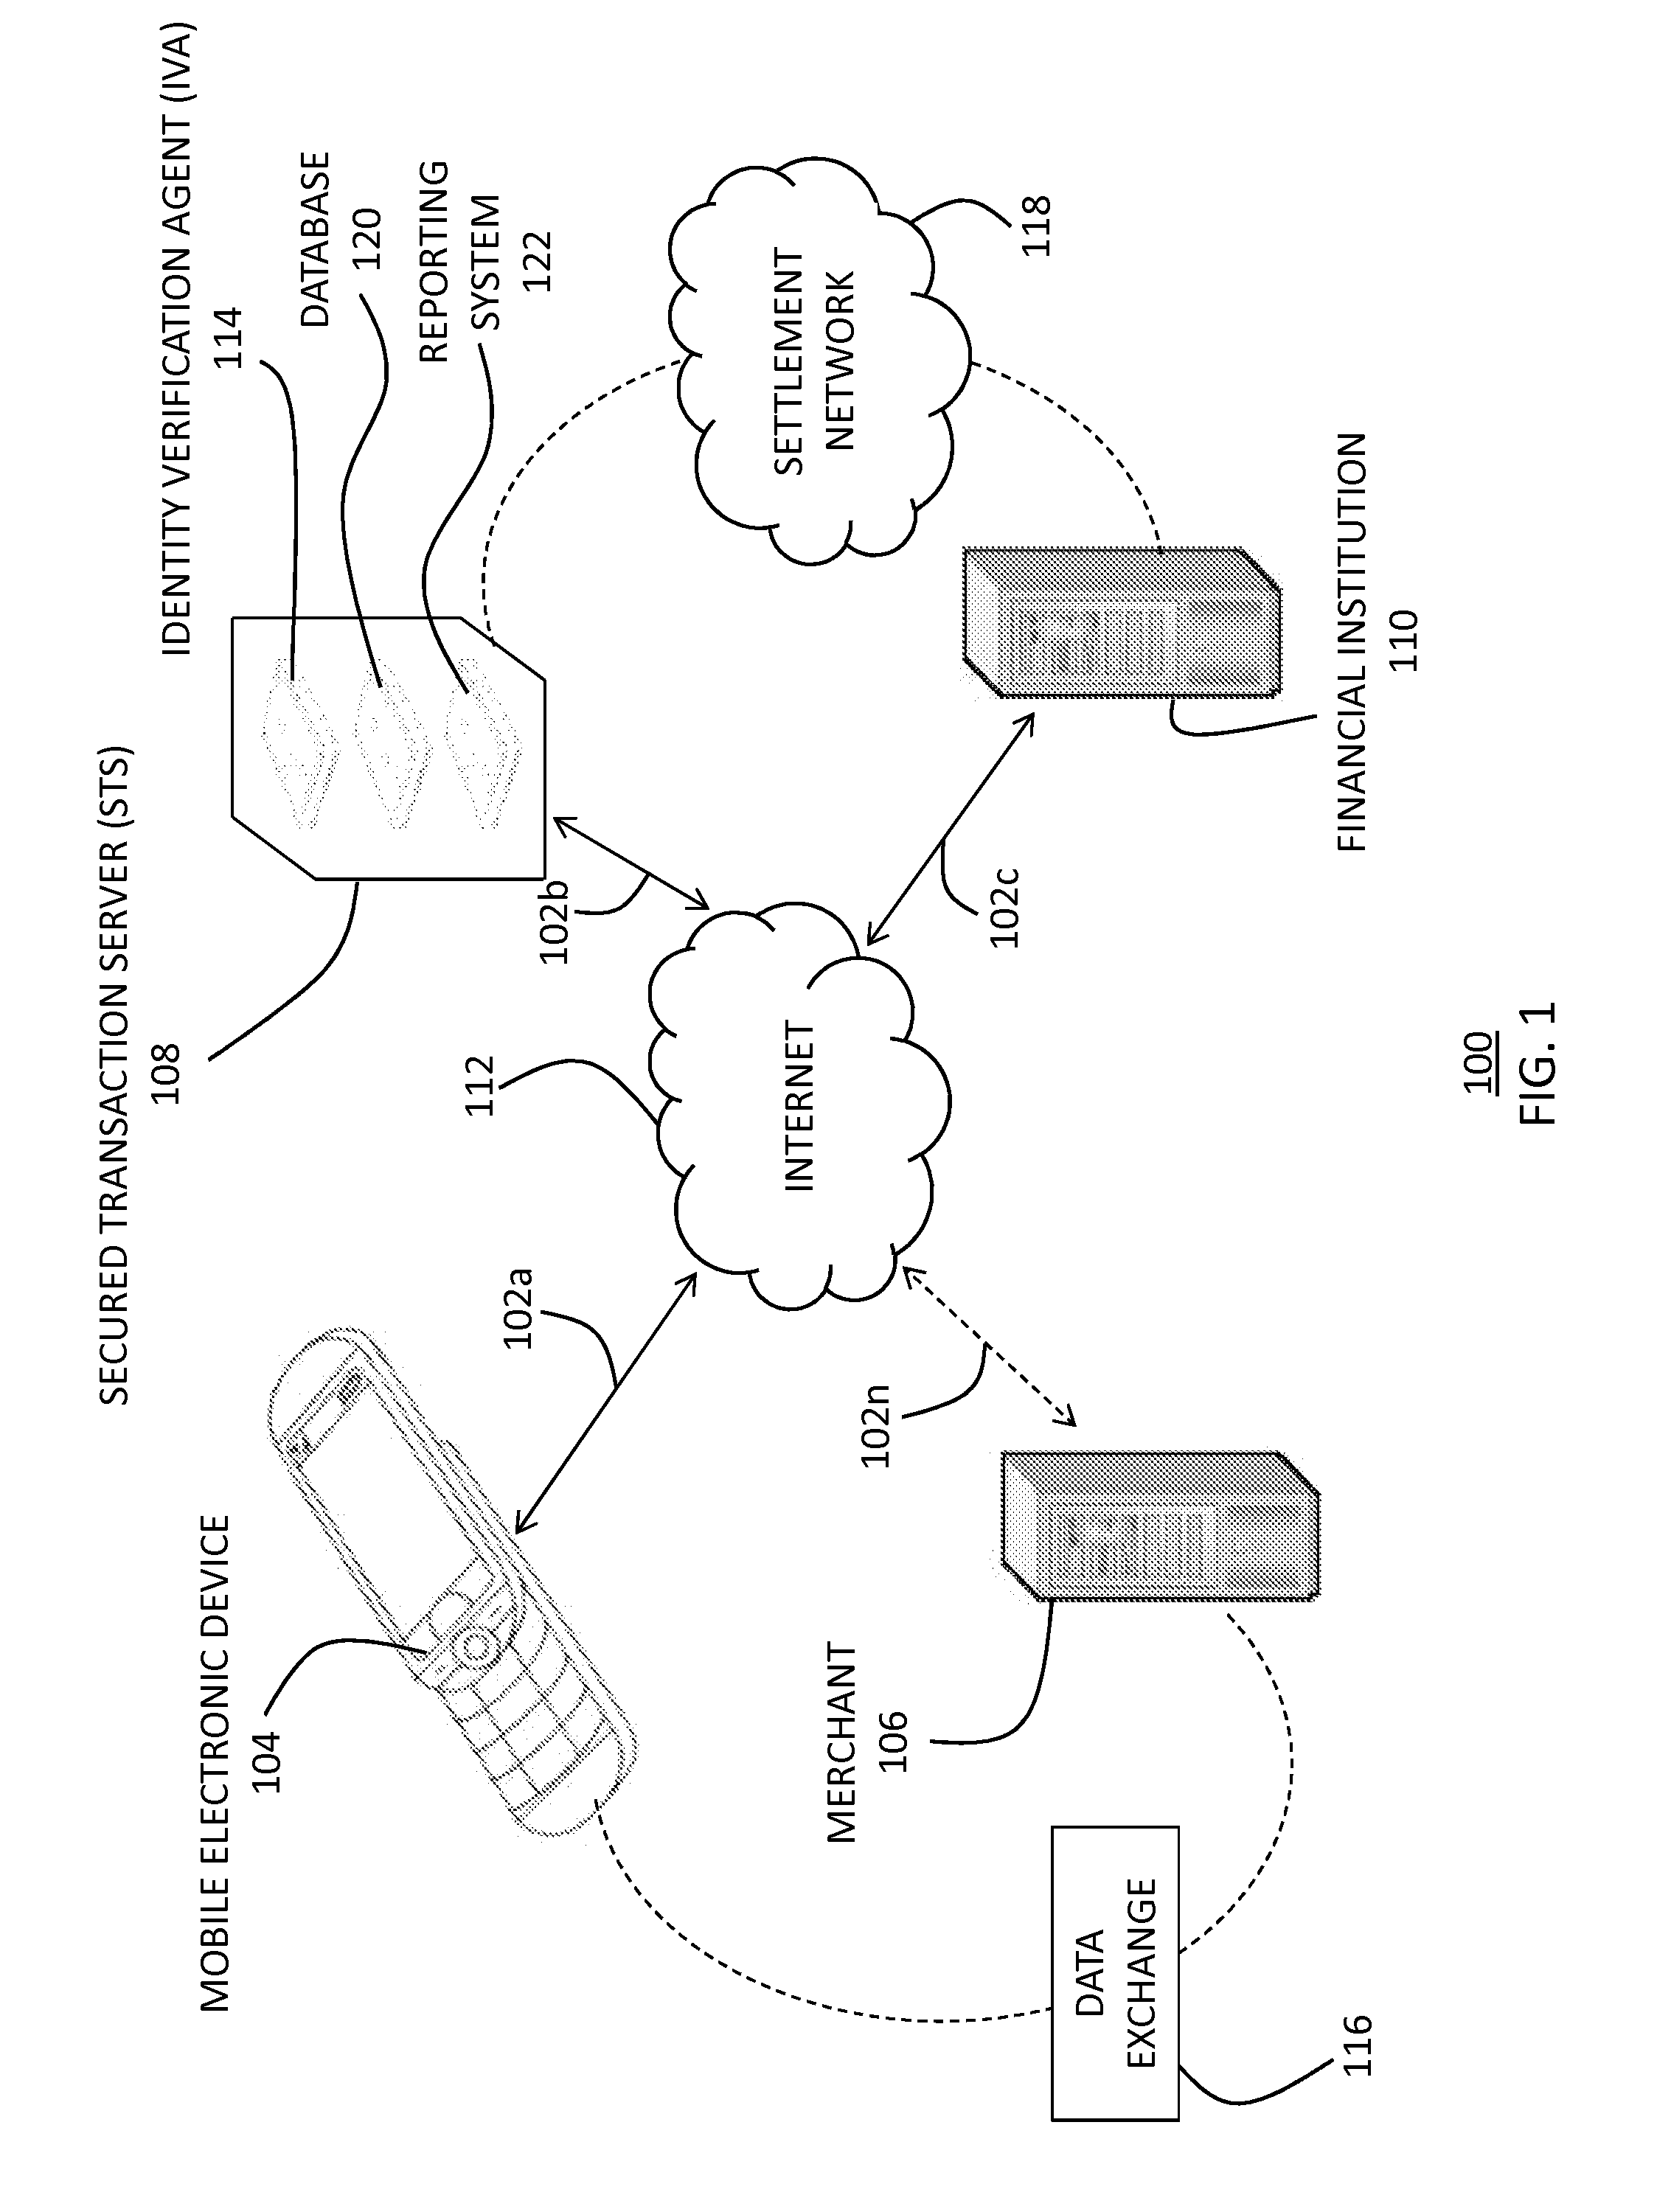 Method for verifying a consumer's identity within a consumer/merchant transaction